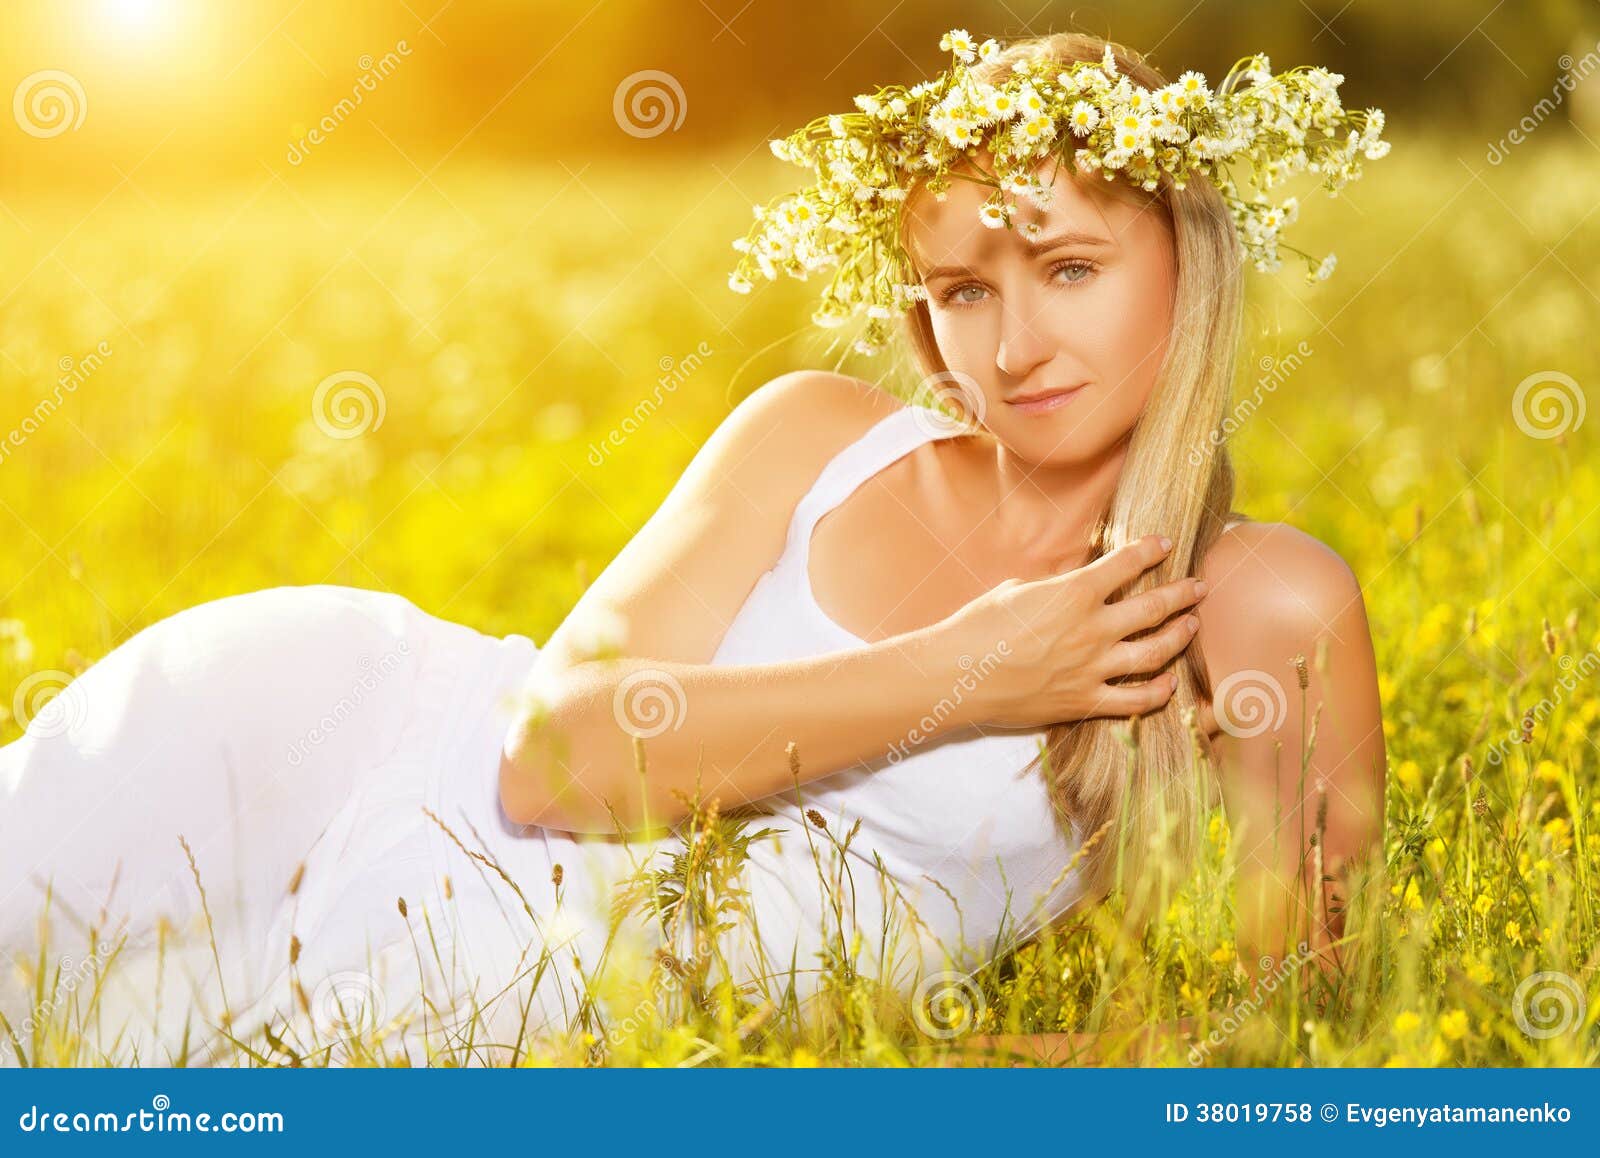 Beautiful Woman in Wreath of Flowers Lies in the Green Grass Out Stock ...